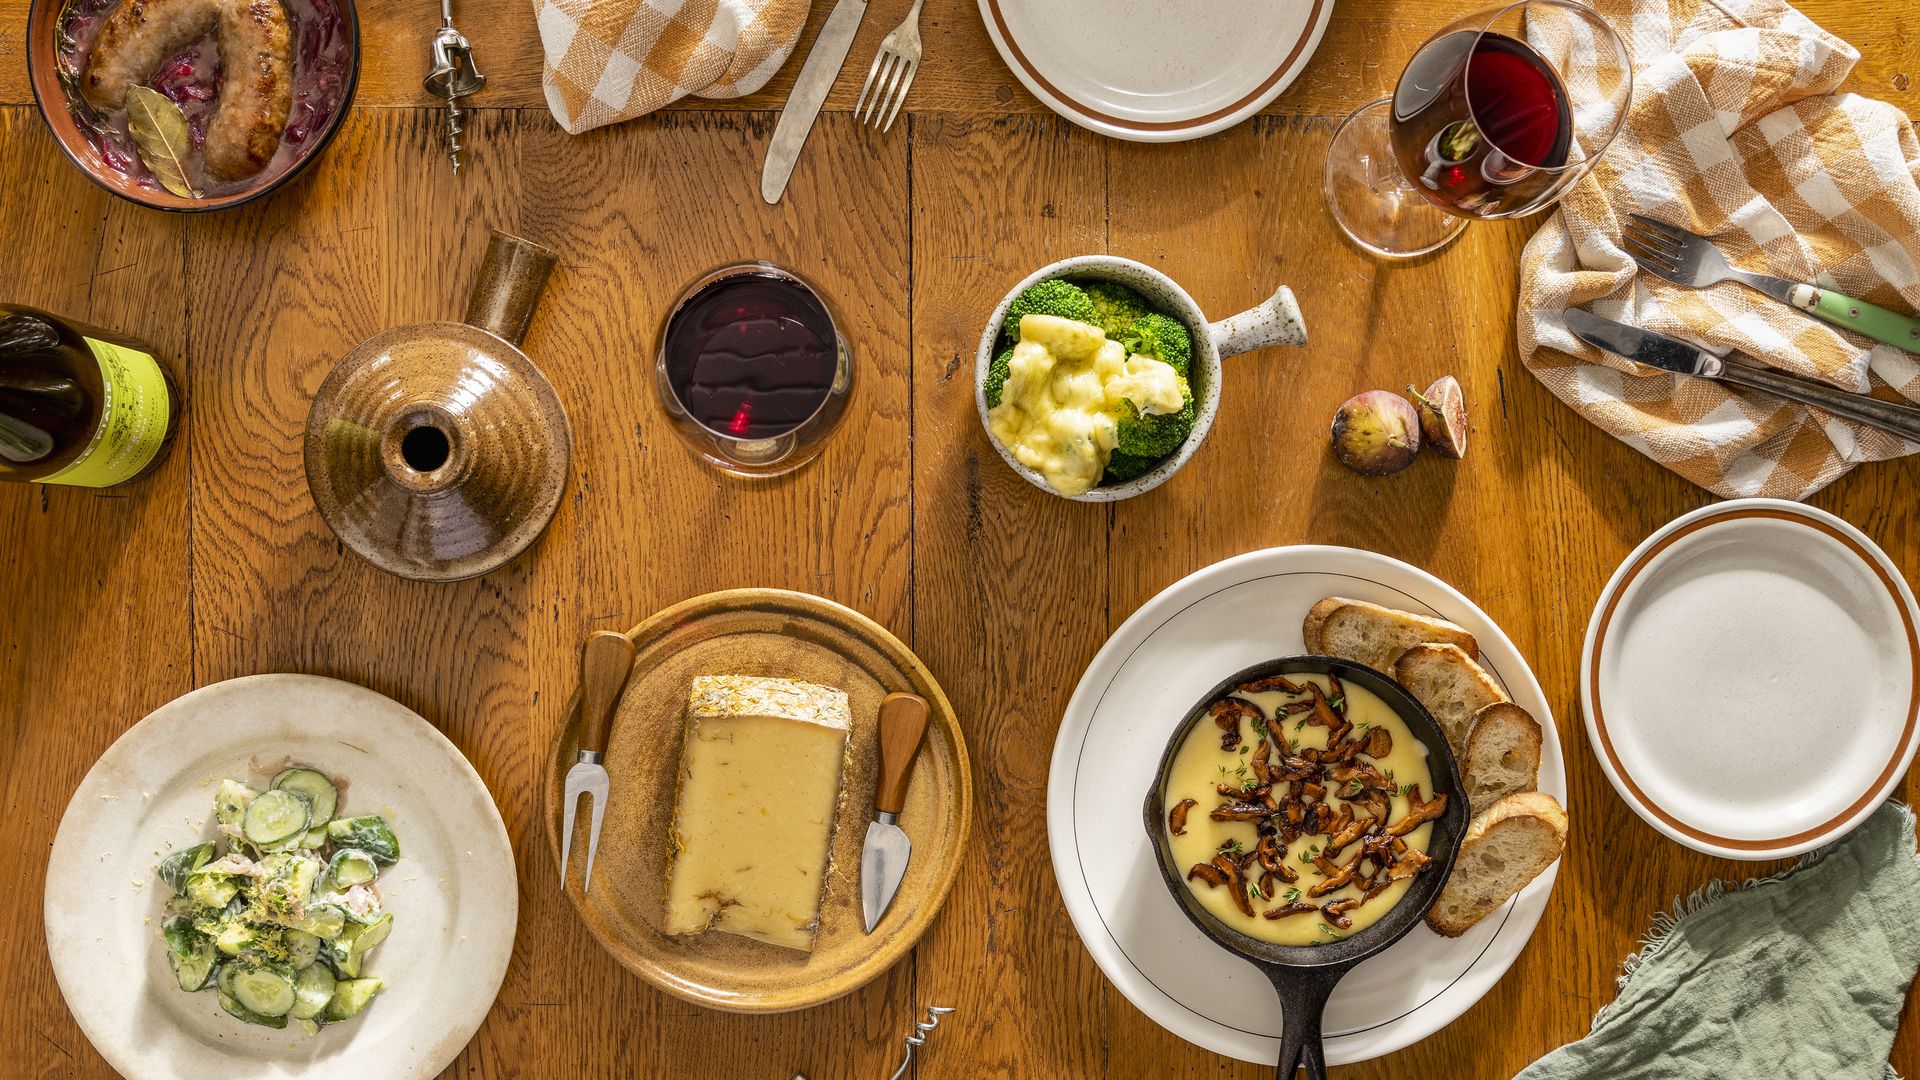 An array of food is set out on a wooden table, including cheese and wine and crusty bread.